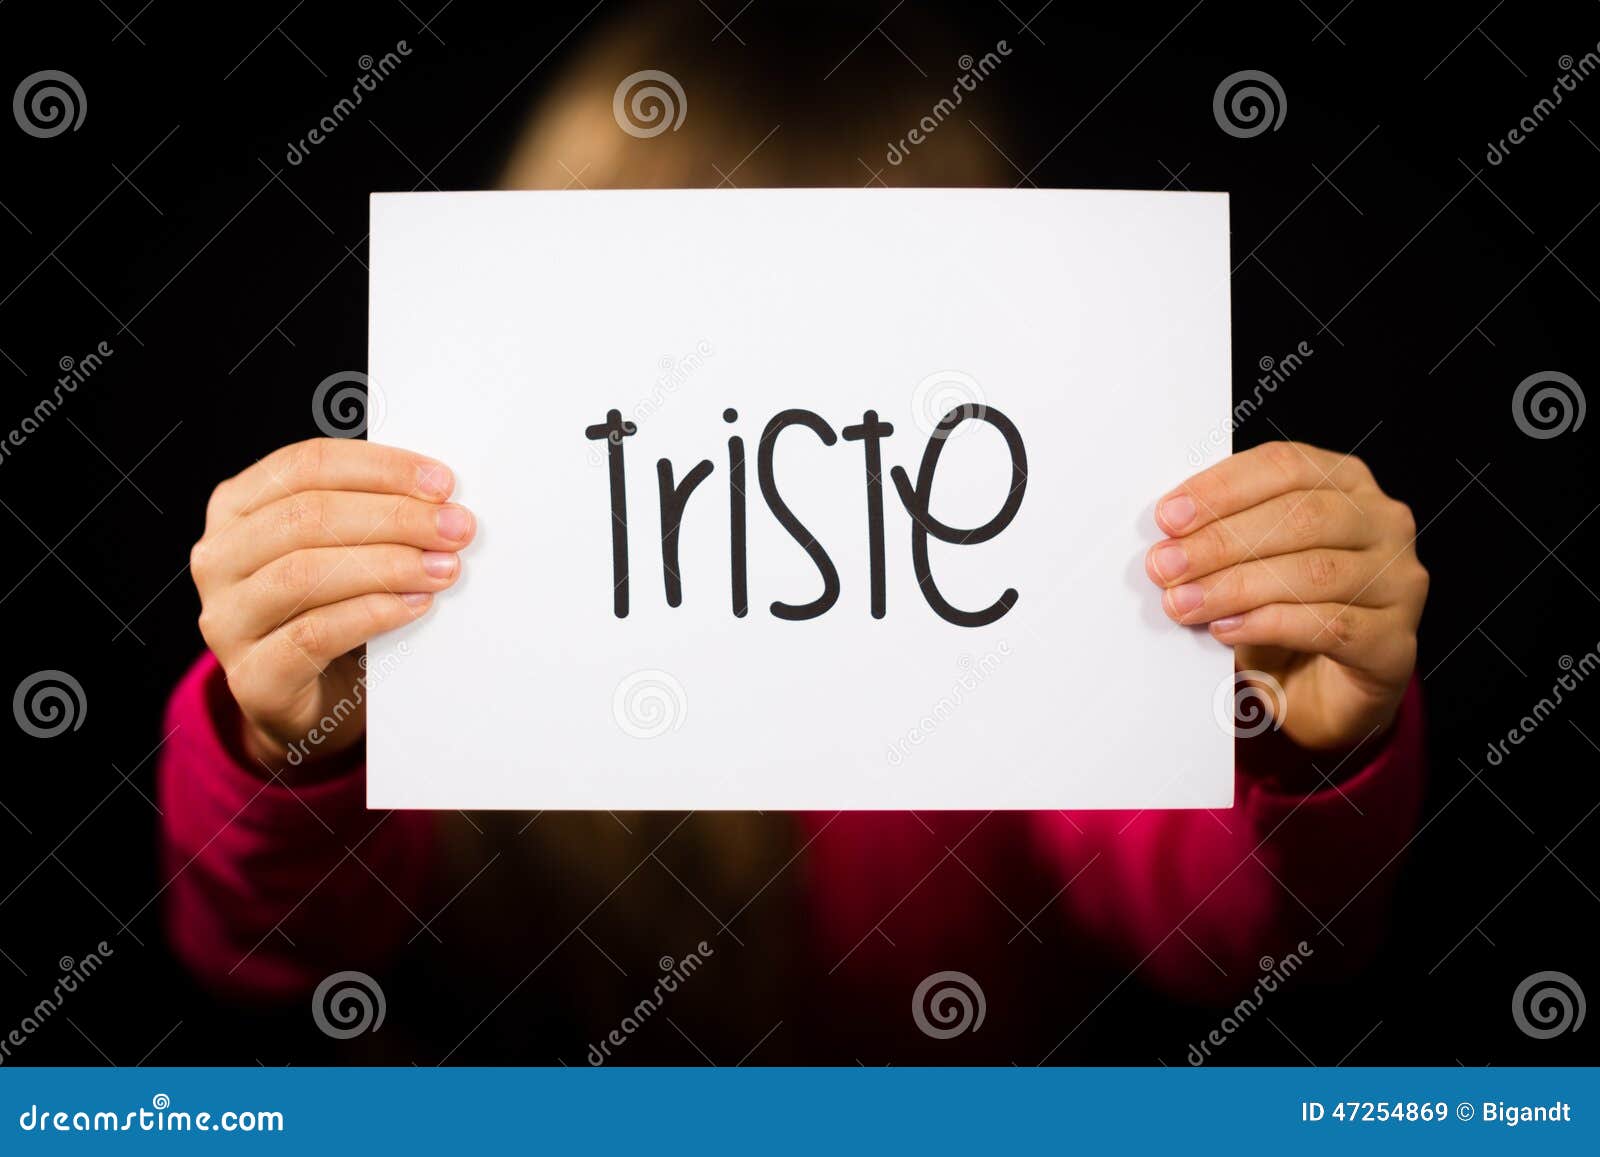 child holding sign with spanish word triste - sorry